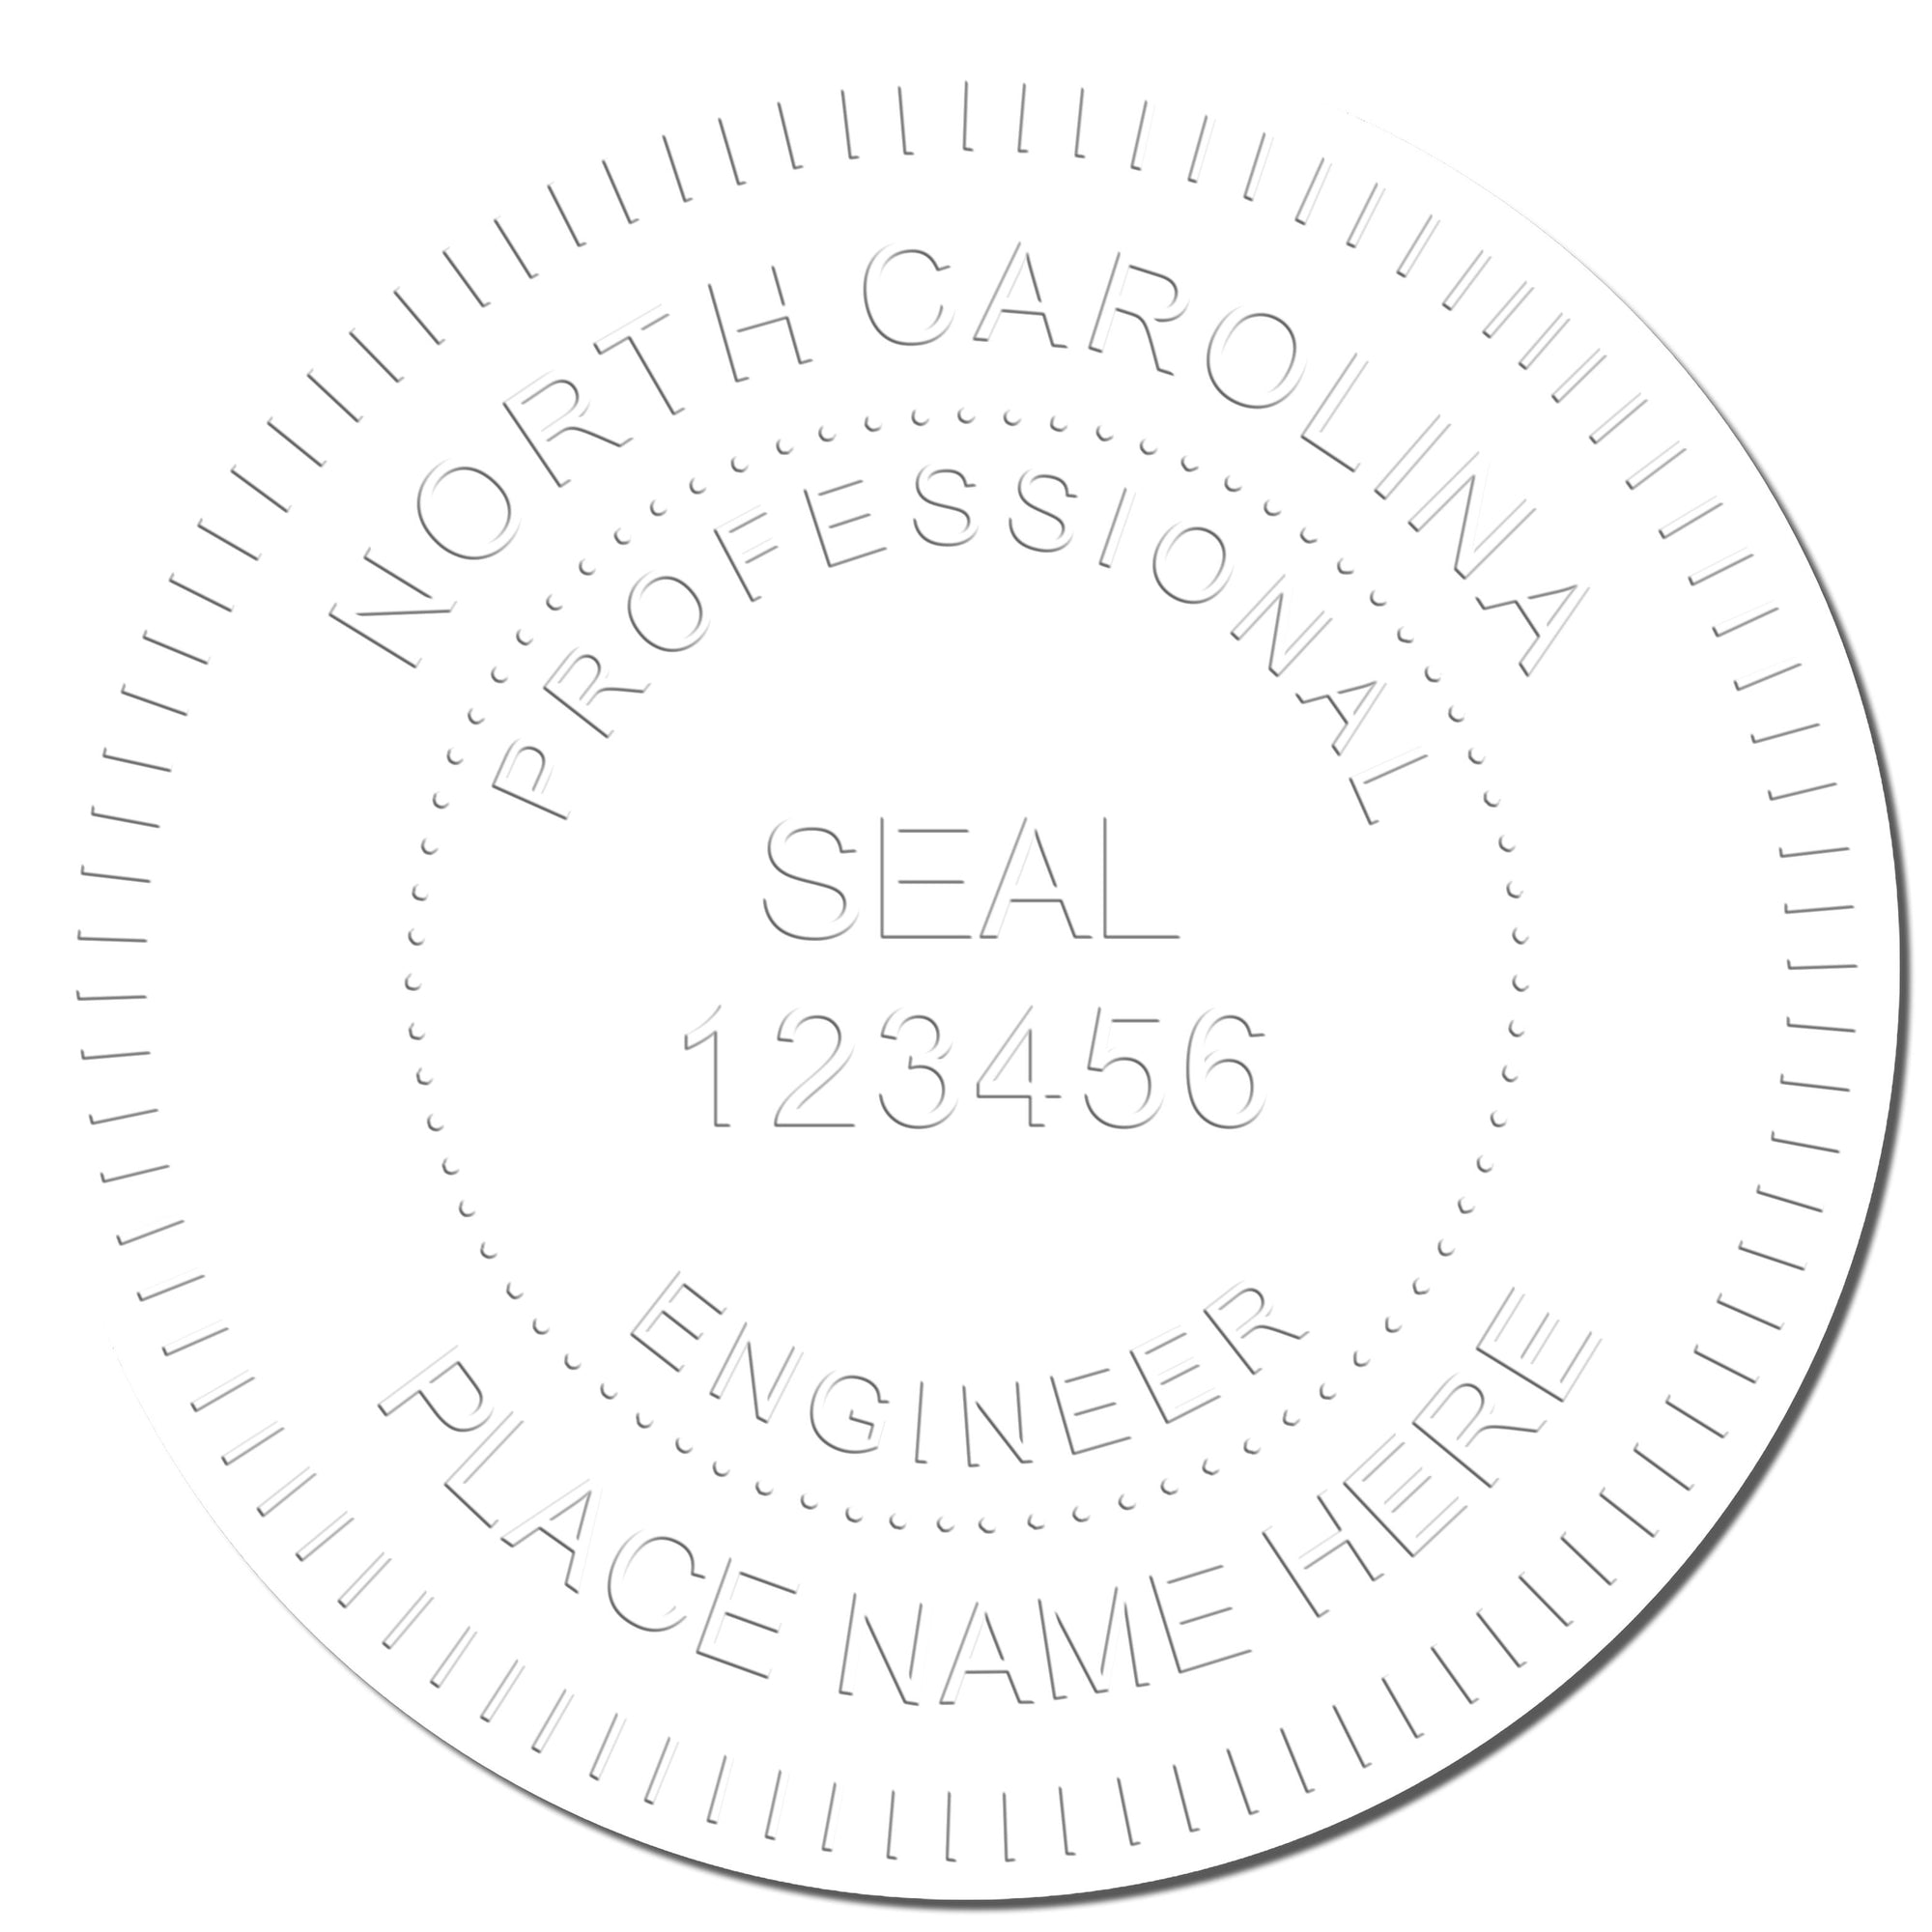 The main image for the North Carolina Engineer Desk Seal depicting a sample of the imprint and electronic files